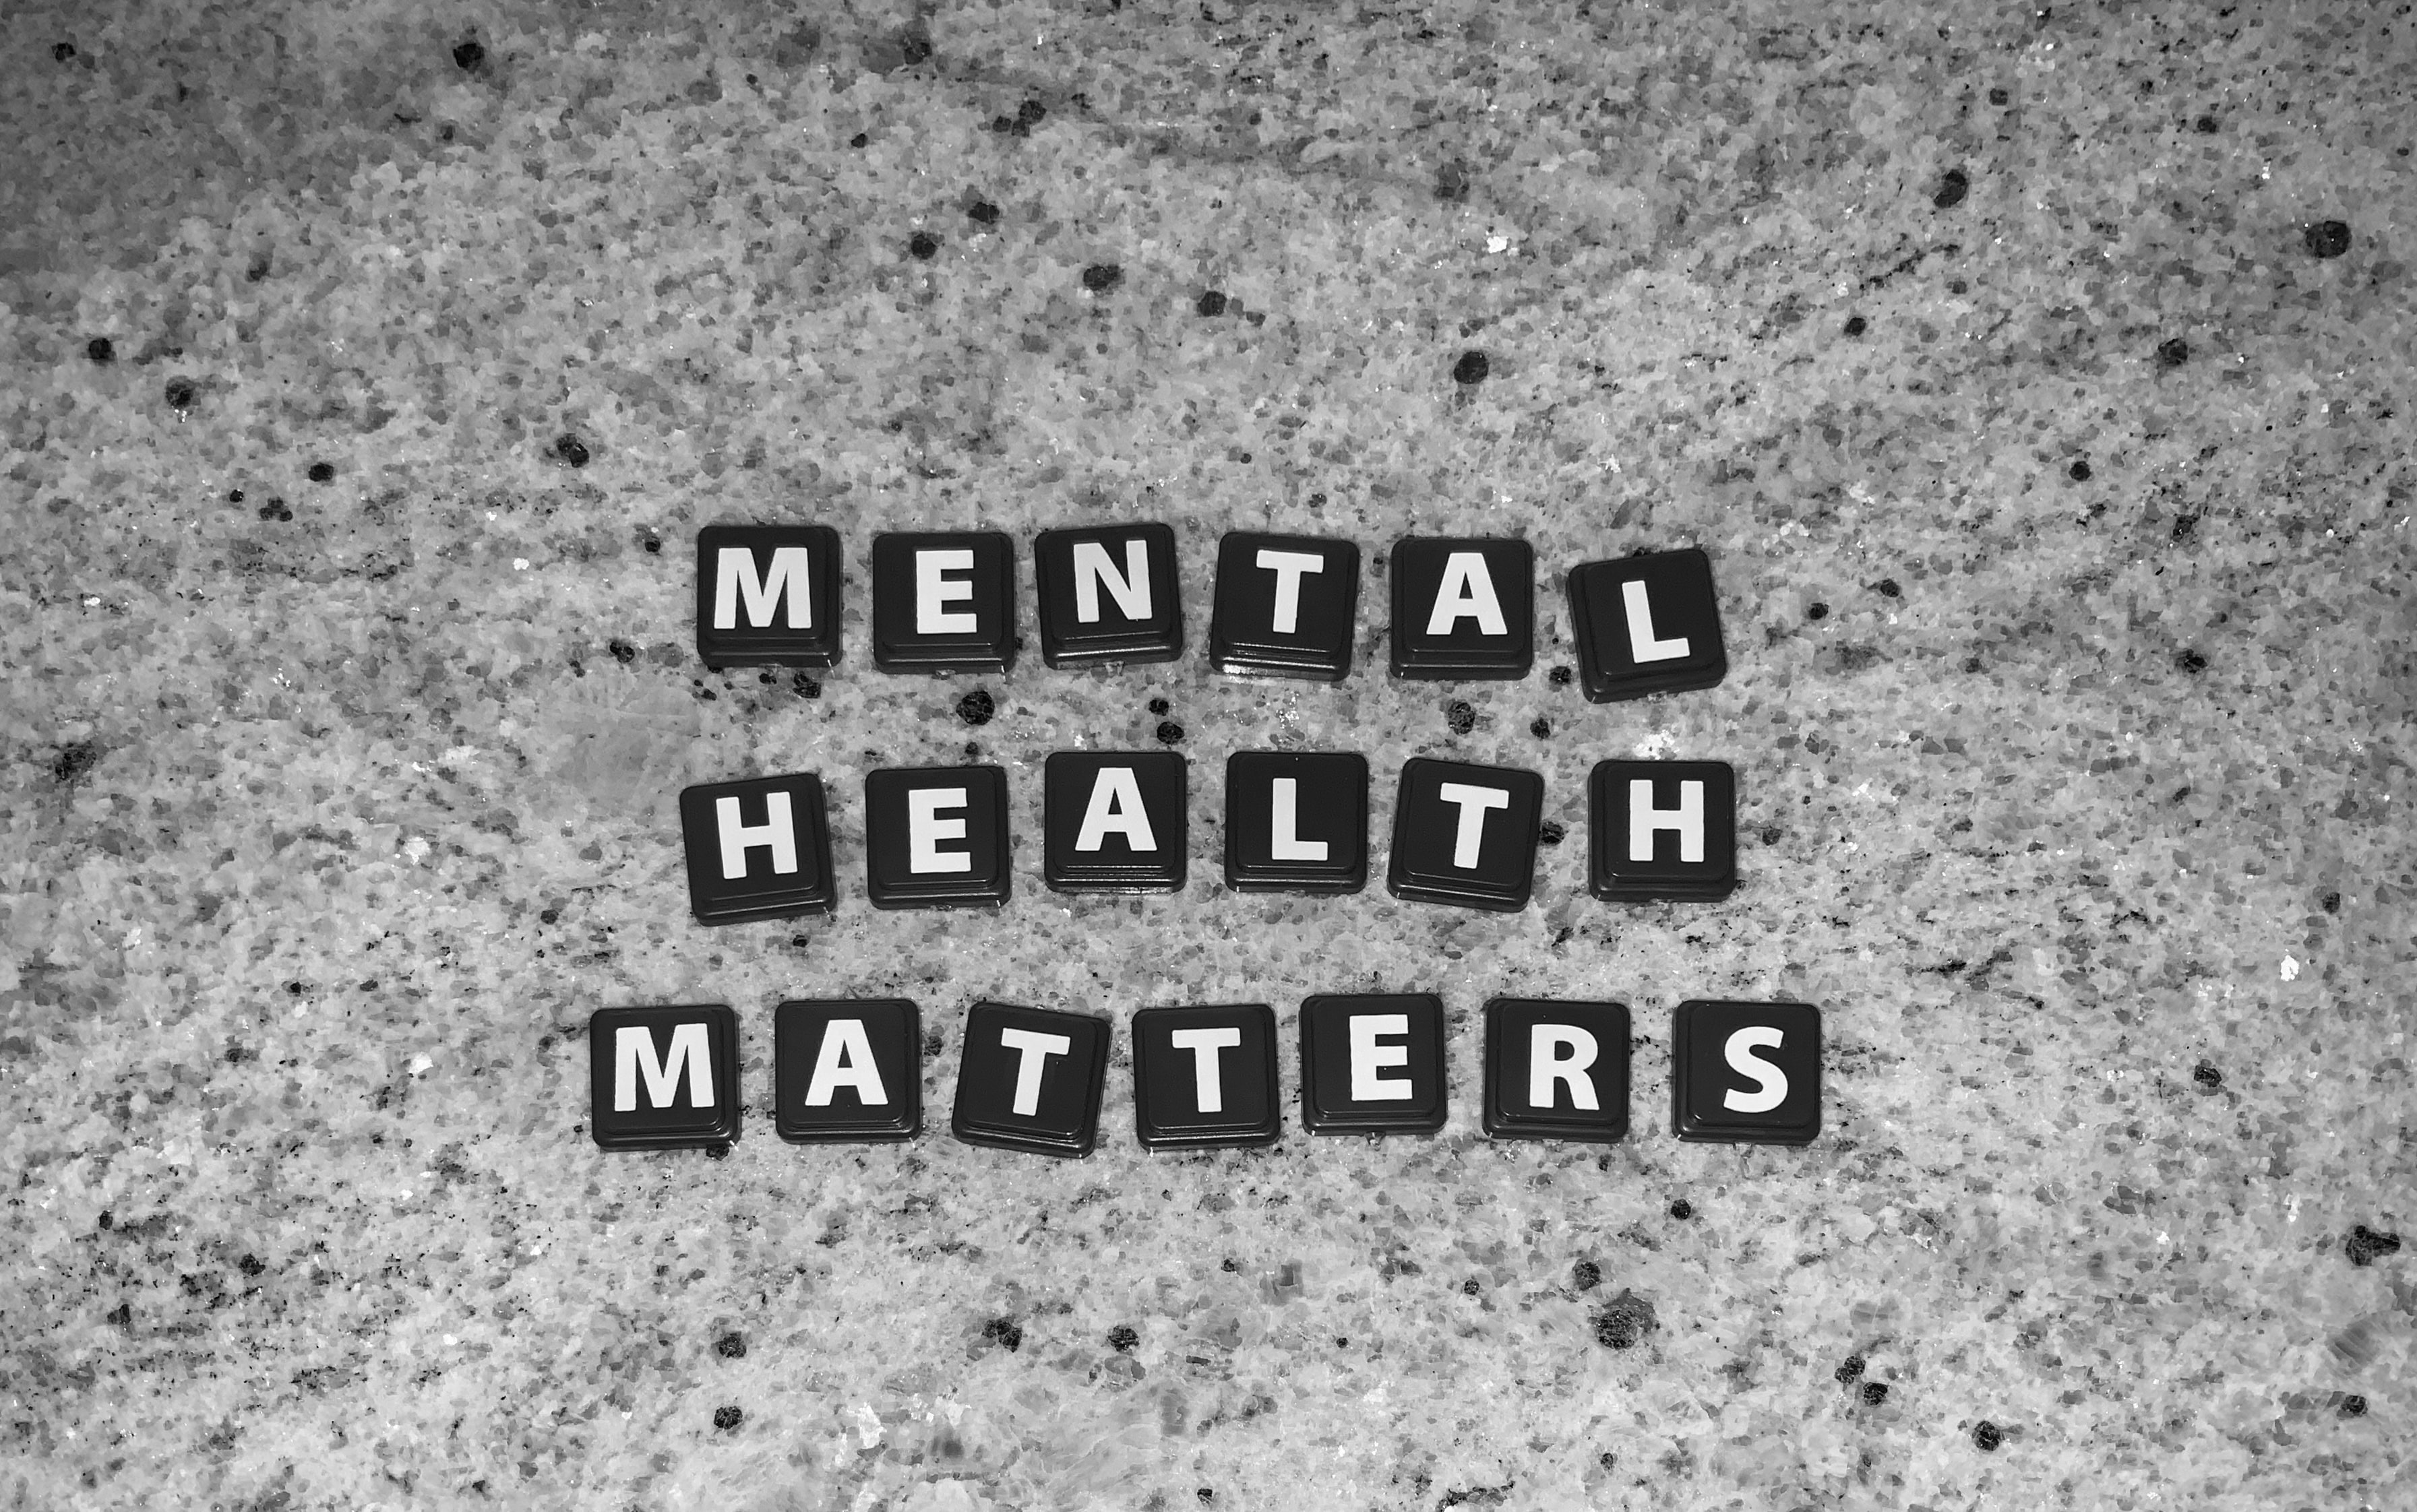 Squares spelling out mental health matters on a grey background